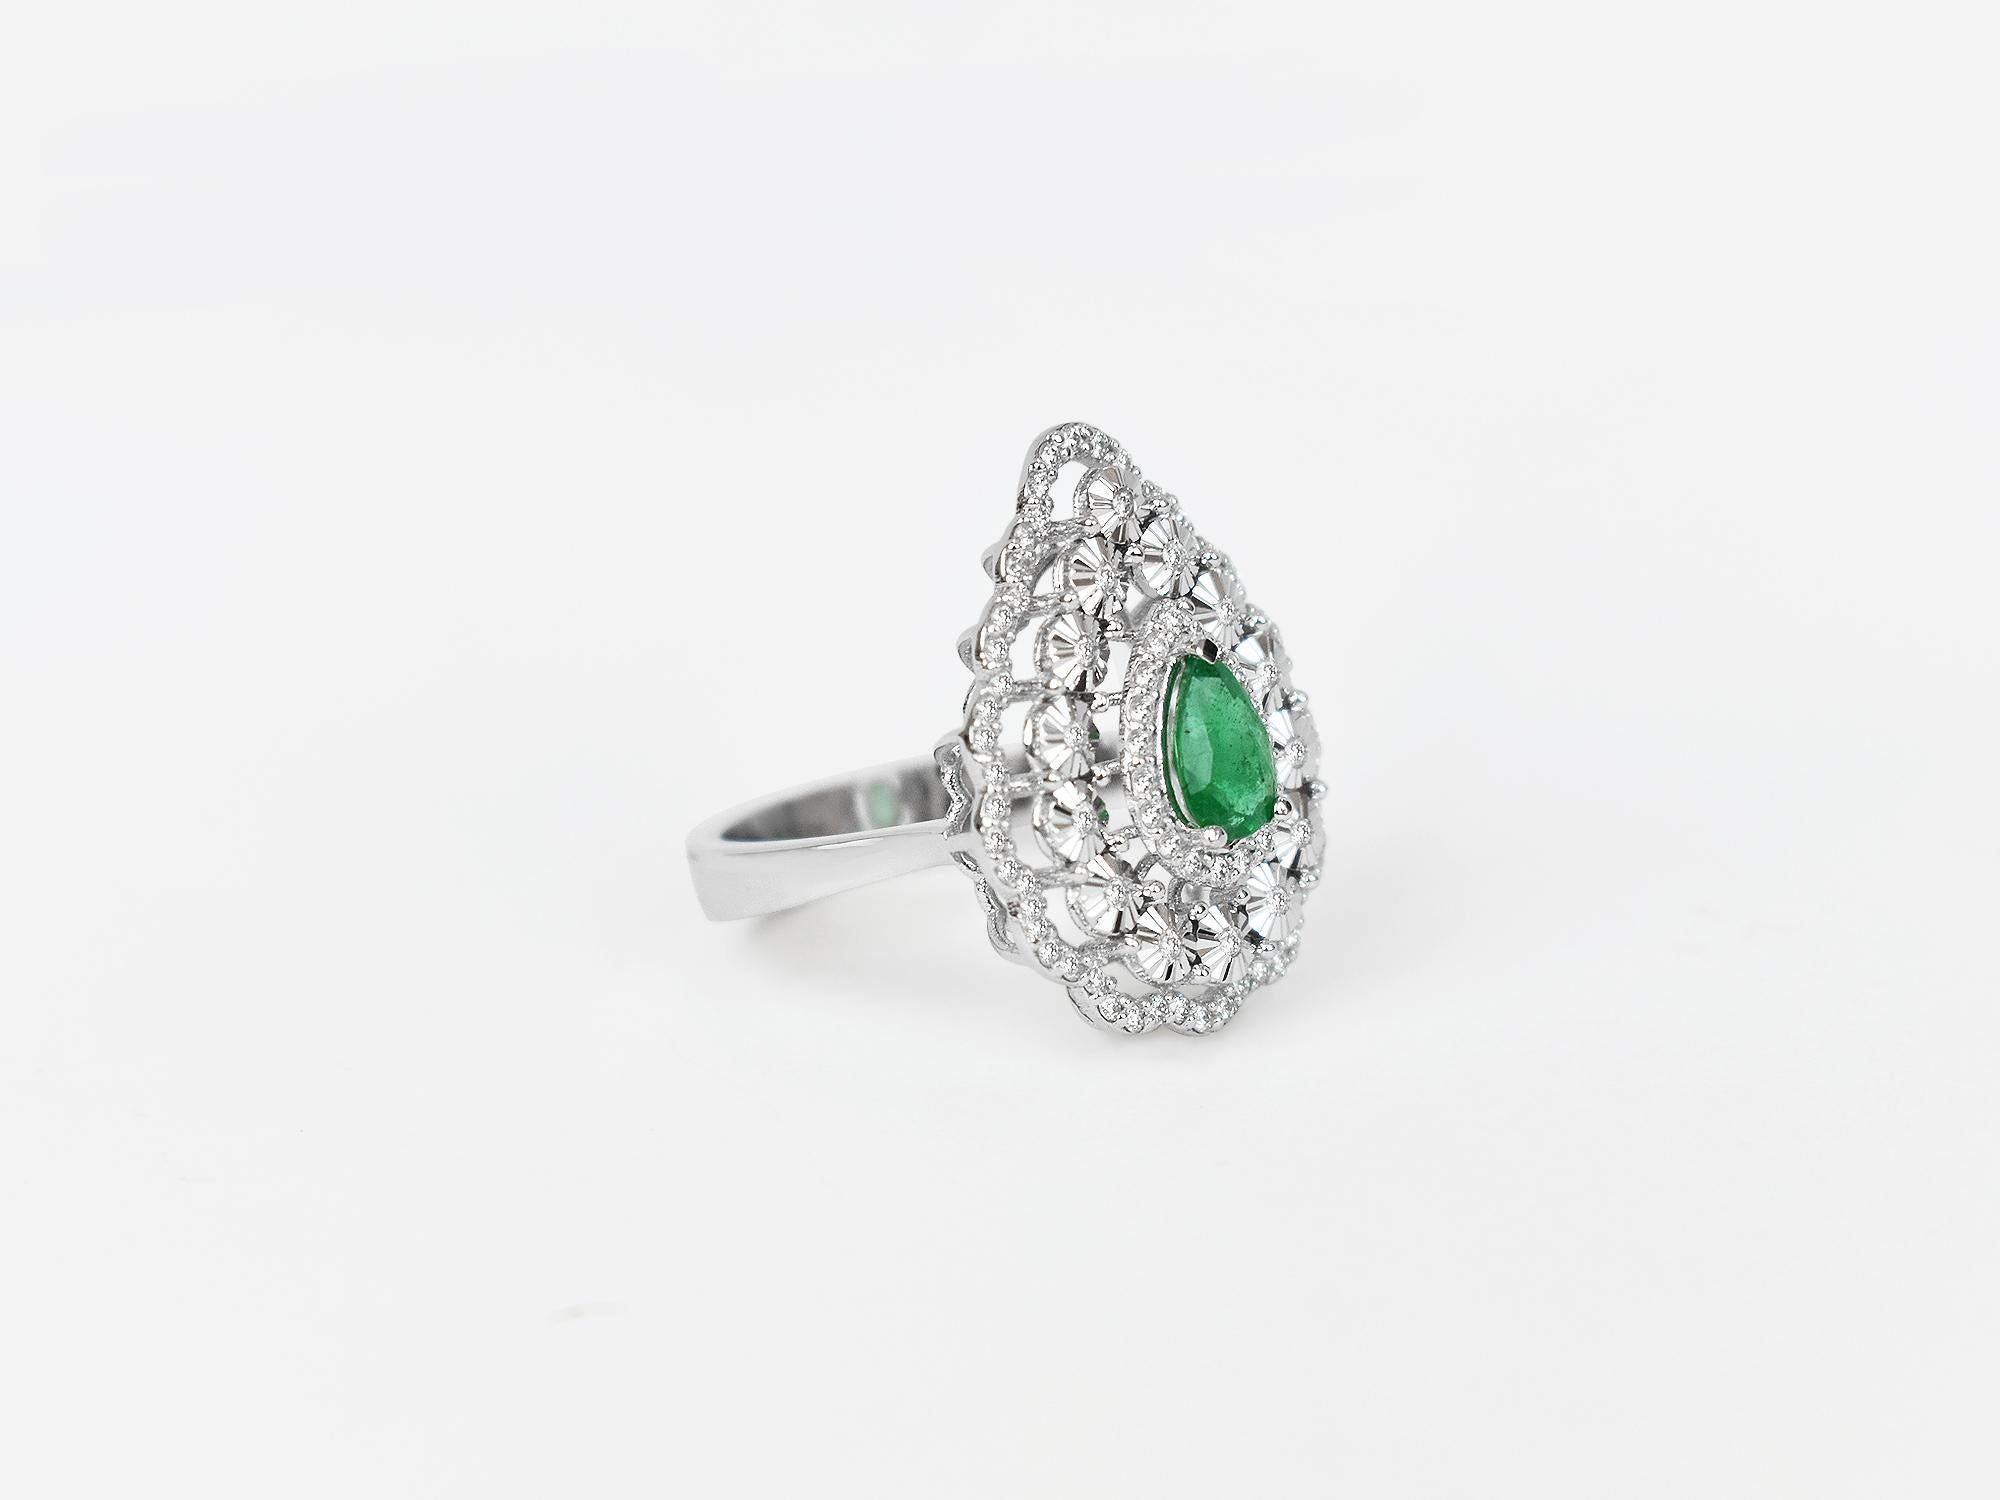 18k Ring White Gold Ring Diamond Ring  Emerald  Ring Emerald Pear Ring  Gold Fancy Ring
     This 18K solid white Gold Emerald / Diamond estate ring. The fine Quality gold finishing with pear shape Zambian emeralds & scintillating cluster pave set